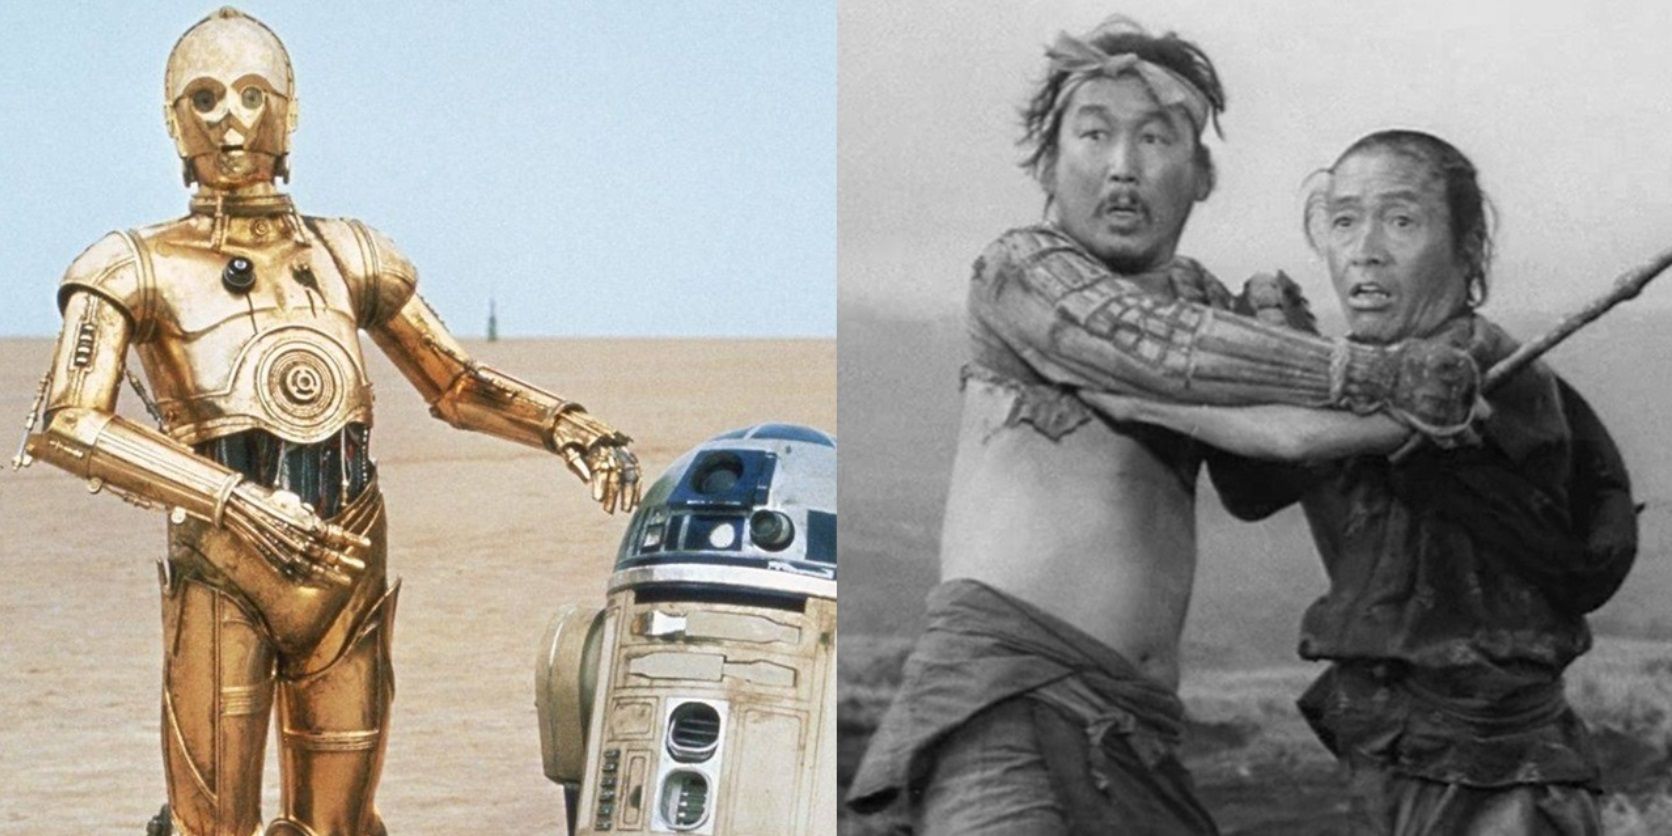 Split image of characters from Star Wars and Akira Kurosawa and the Hidden Fortress.